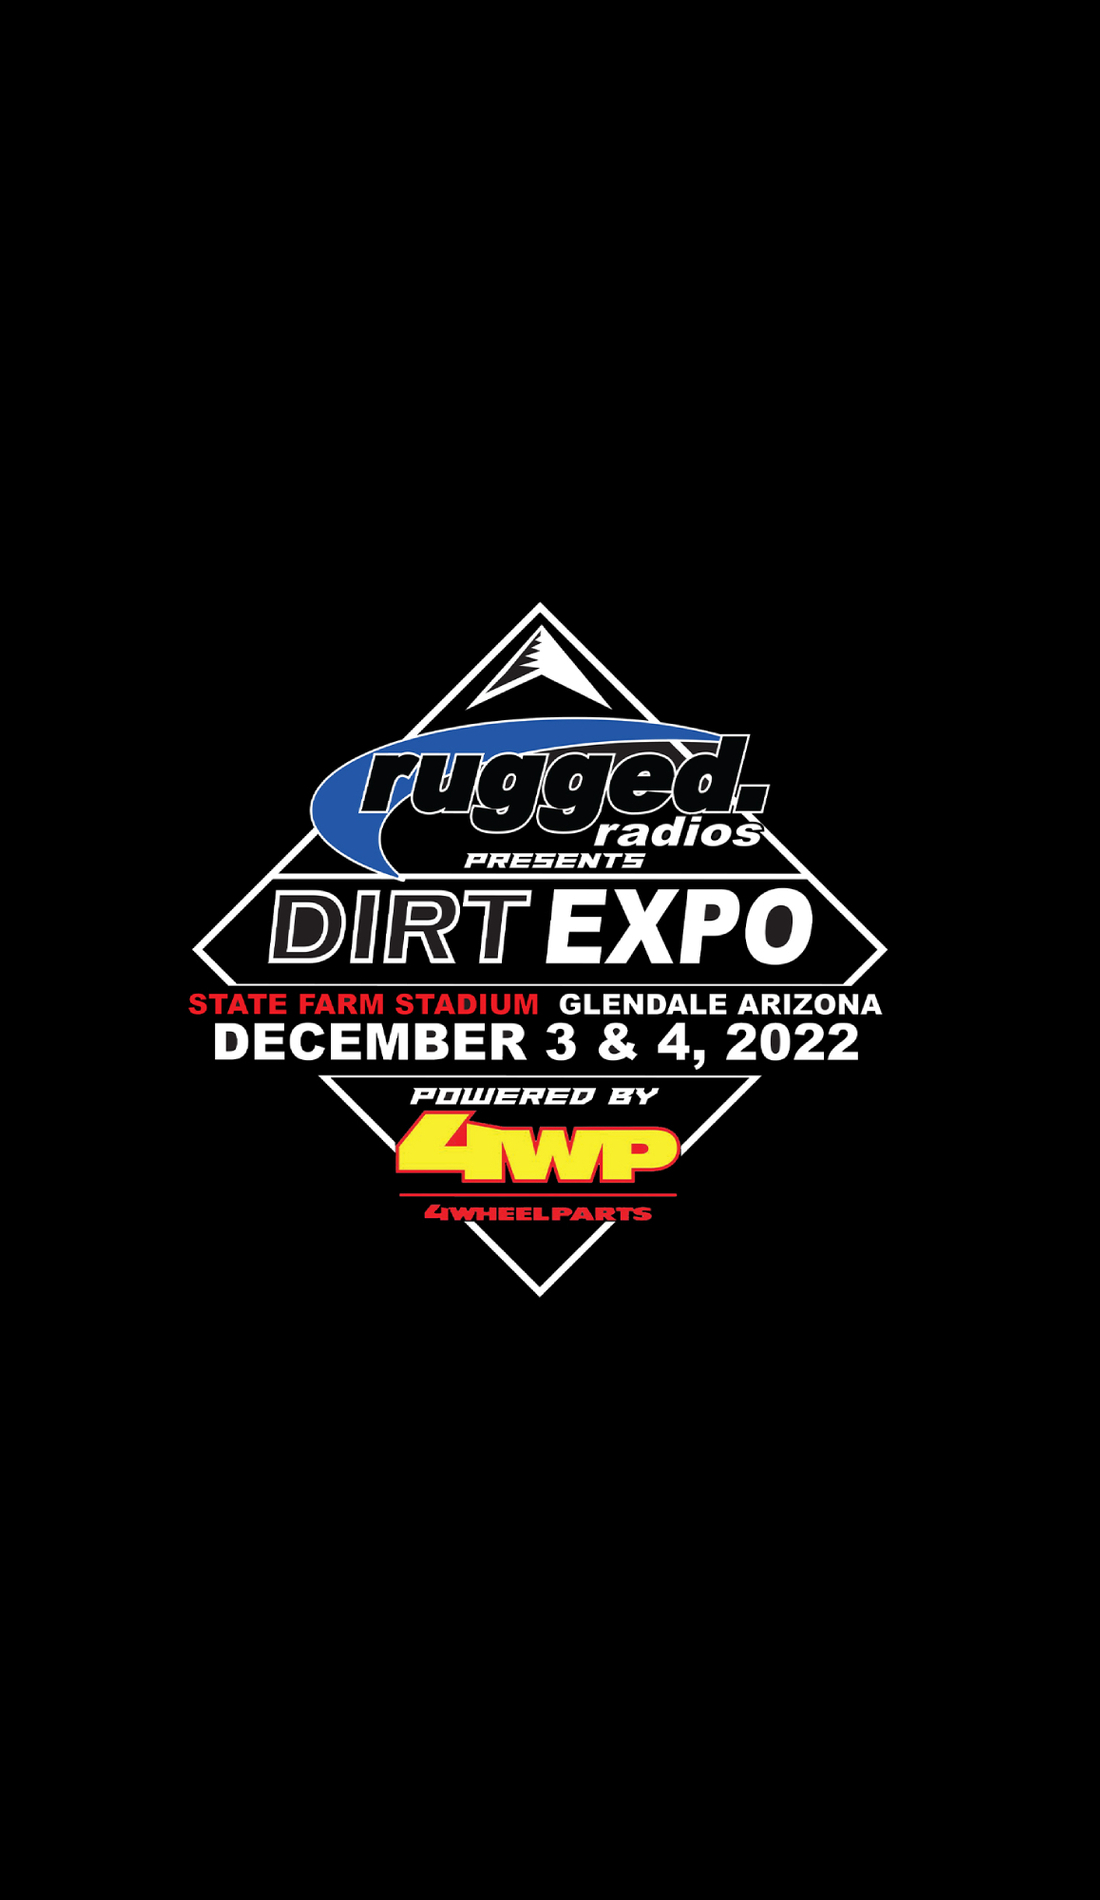 A Dirt Expo Presented by Rugged Radios and Powered by 4 Wheel Parts live event